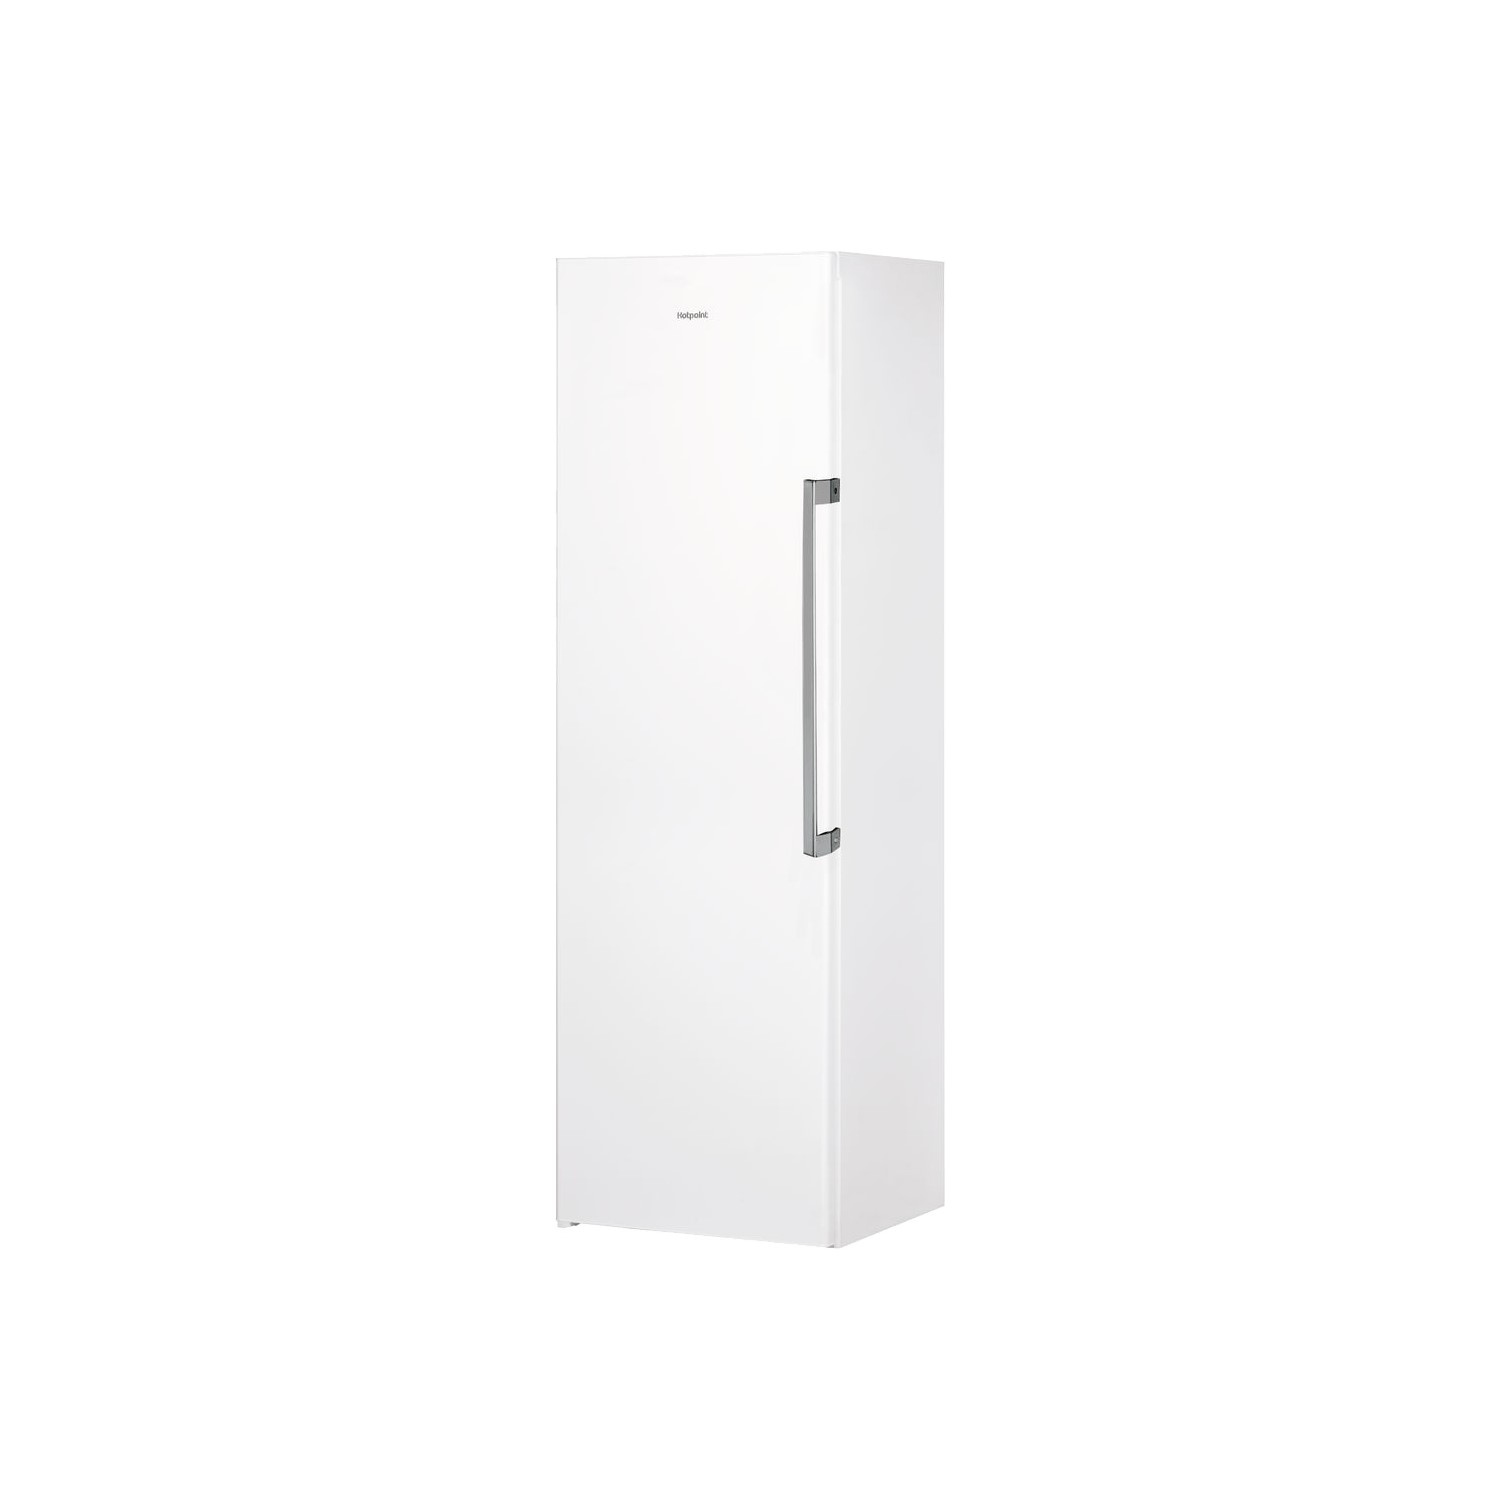 Hotpoint UH8F1CW.1 Frost Free Upright Freezer - White - A+ Rated